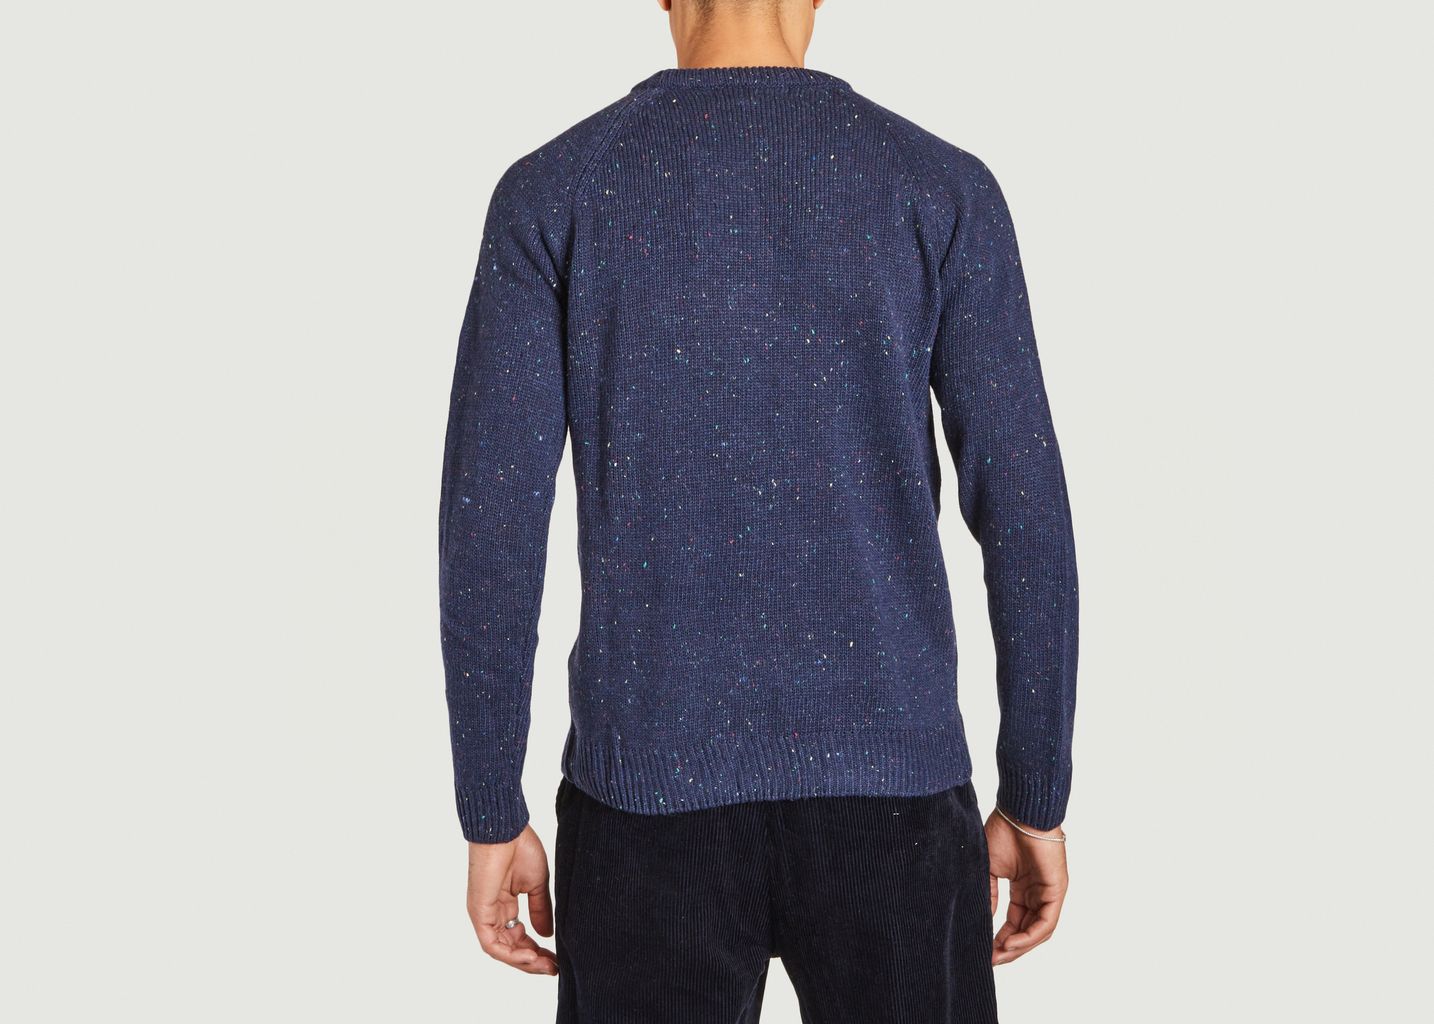 Pedro speckled sweater - SUIT